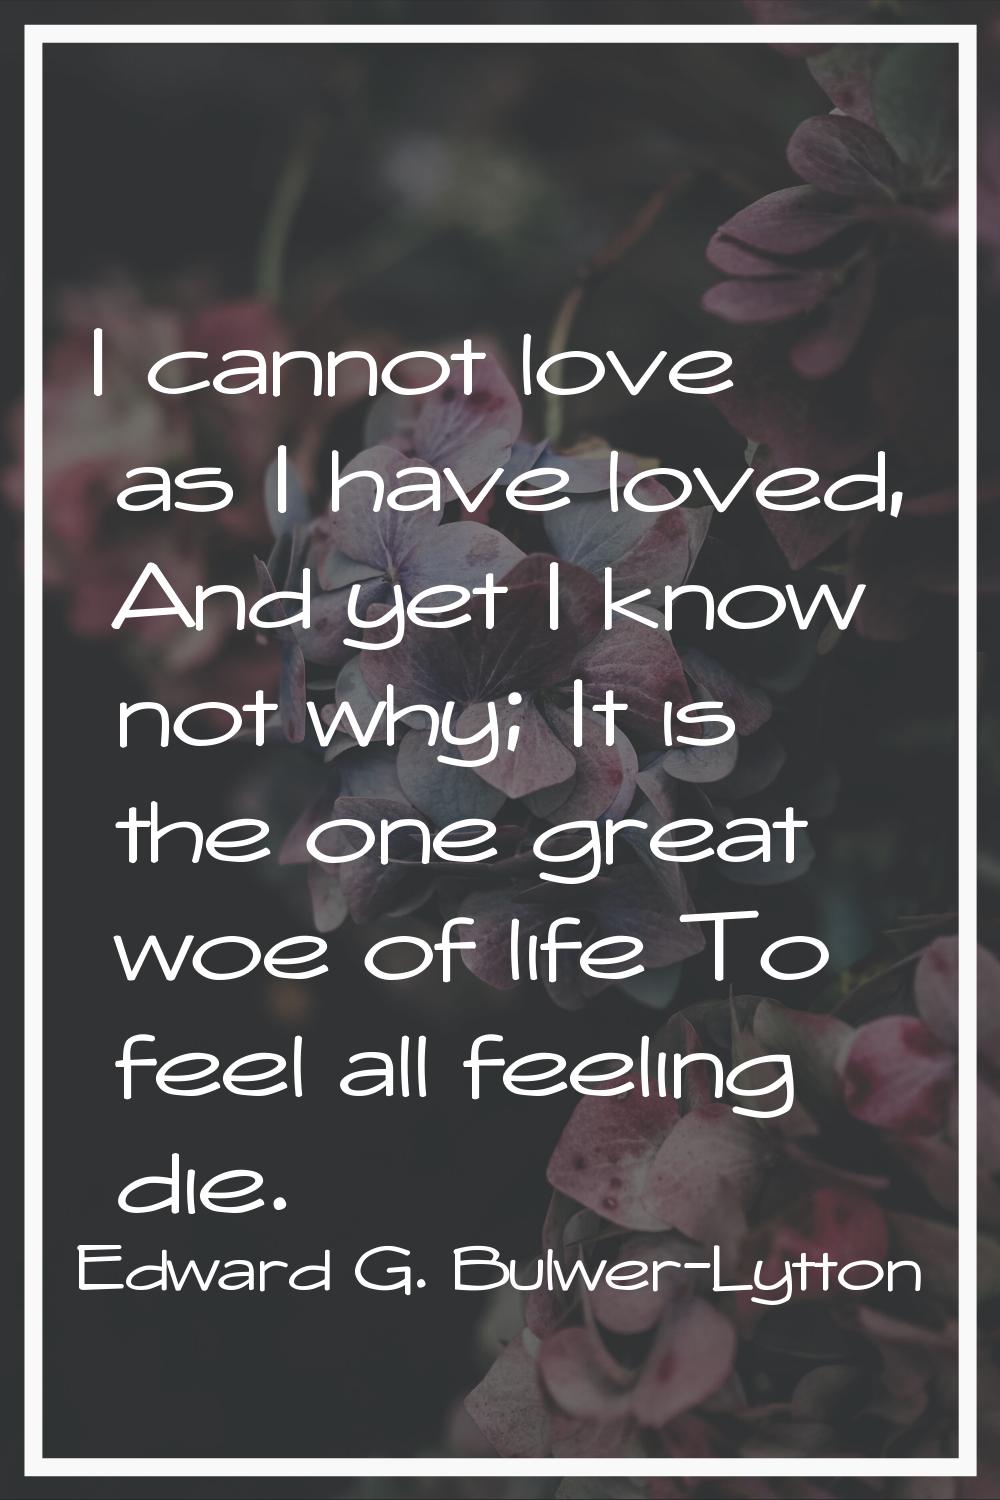 I cannot love as I have loved, And yet I know not why; It is the one great woe of life To feel all 